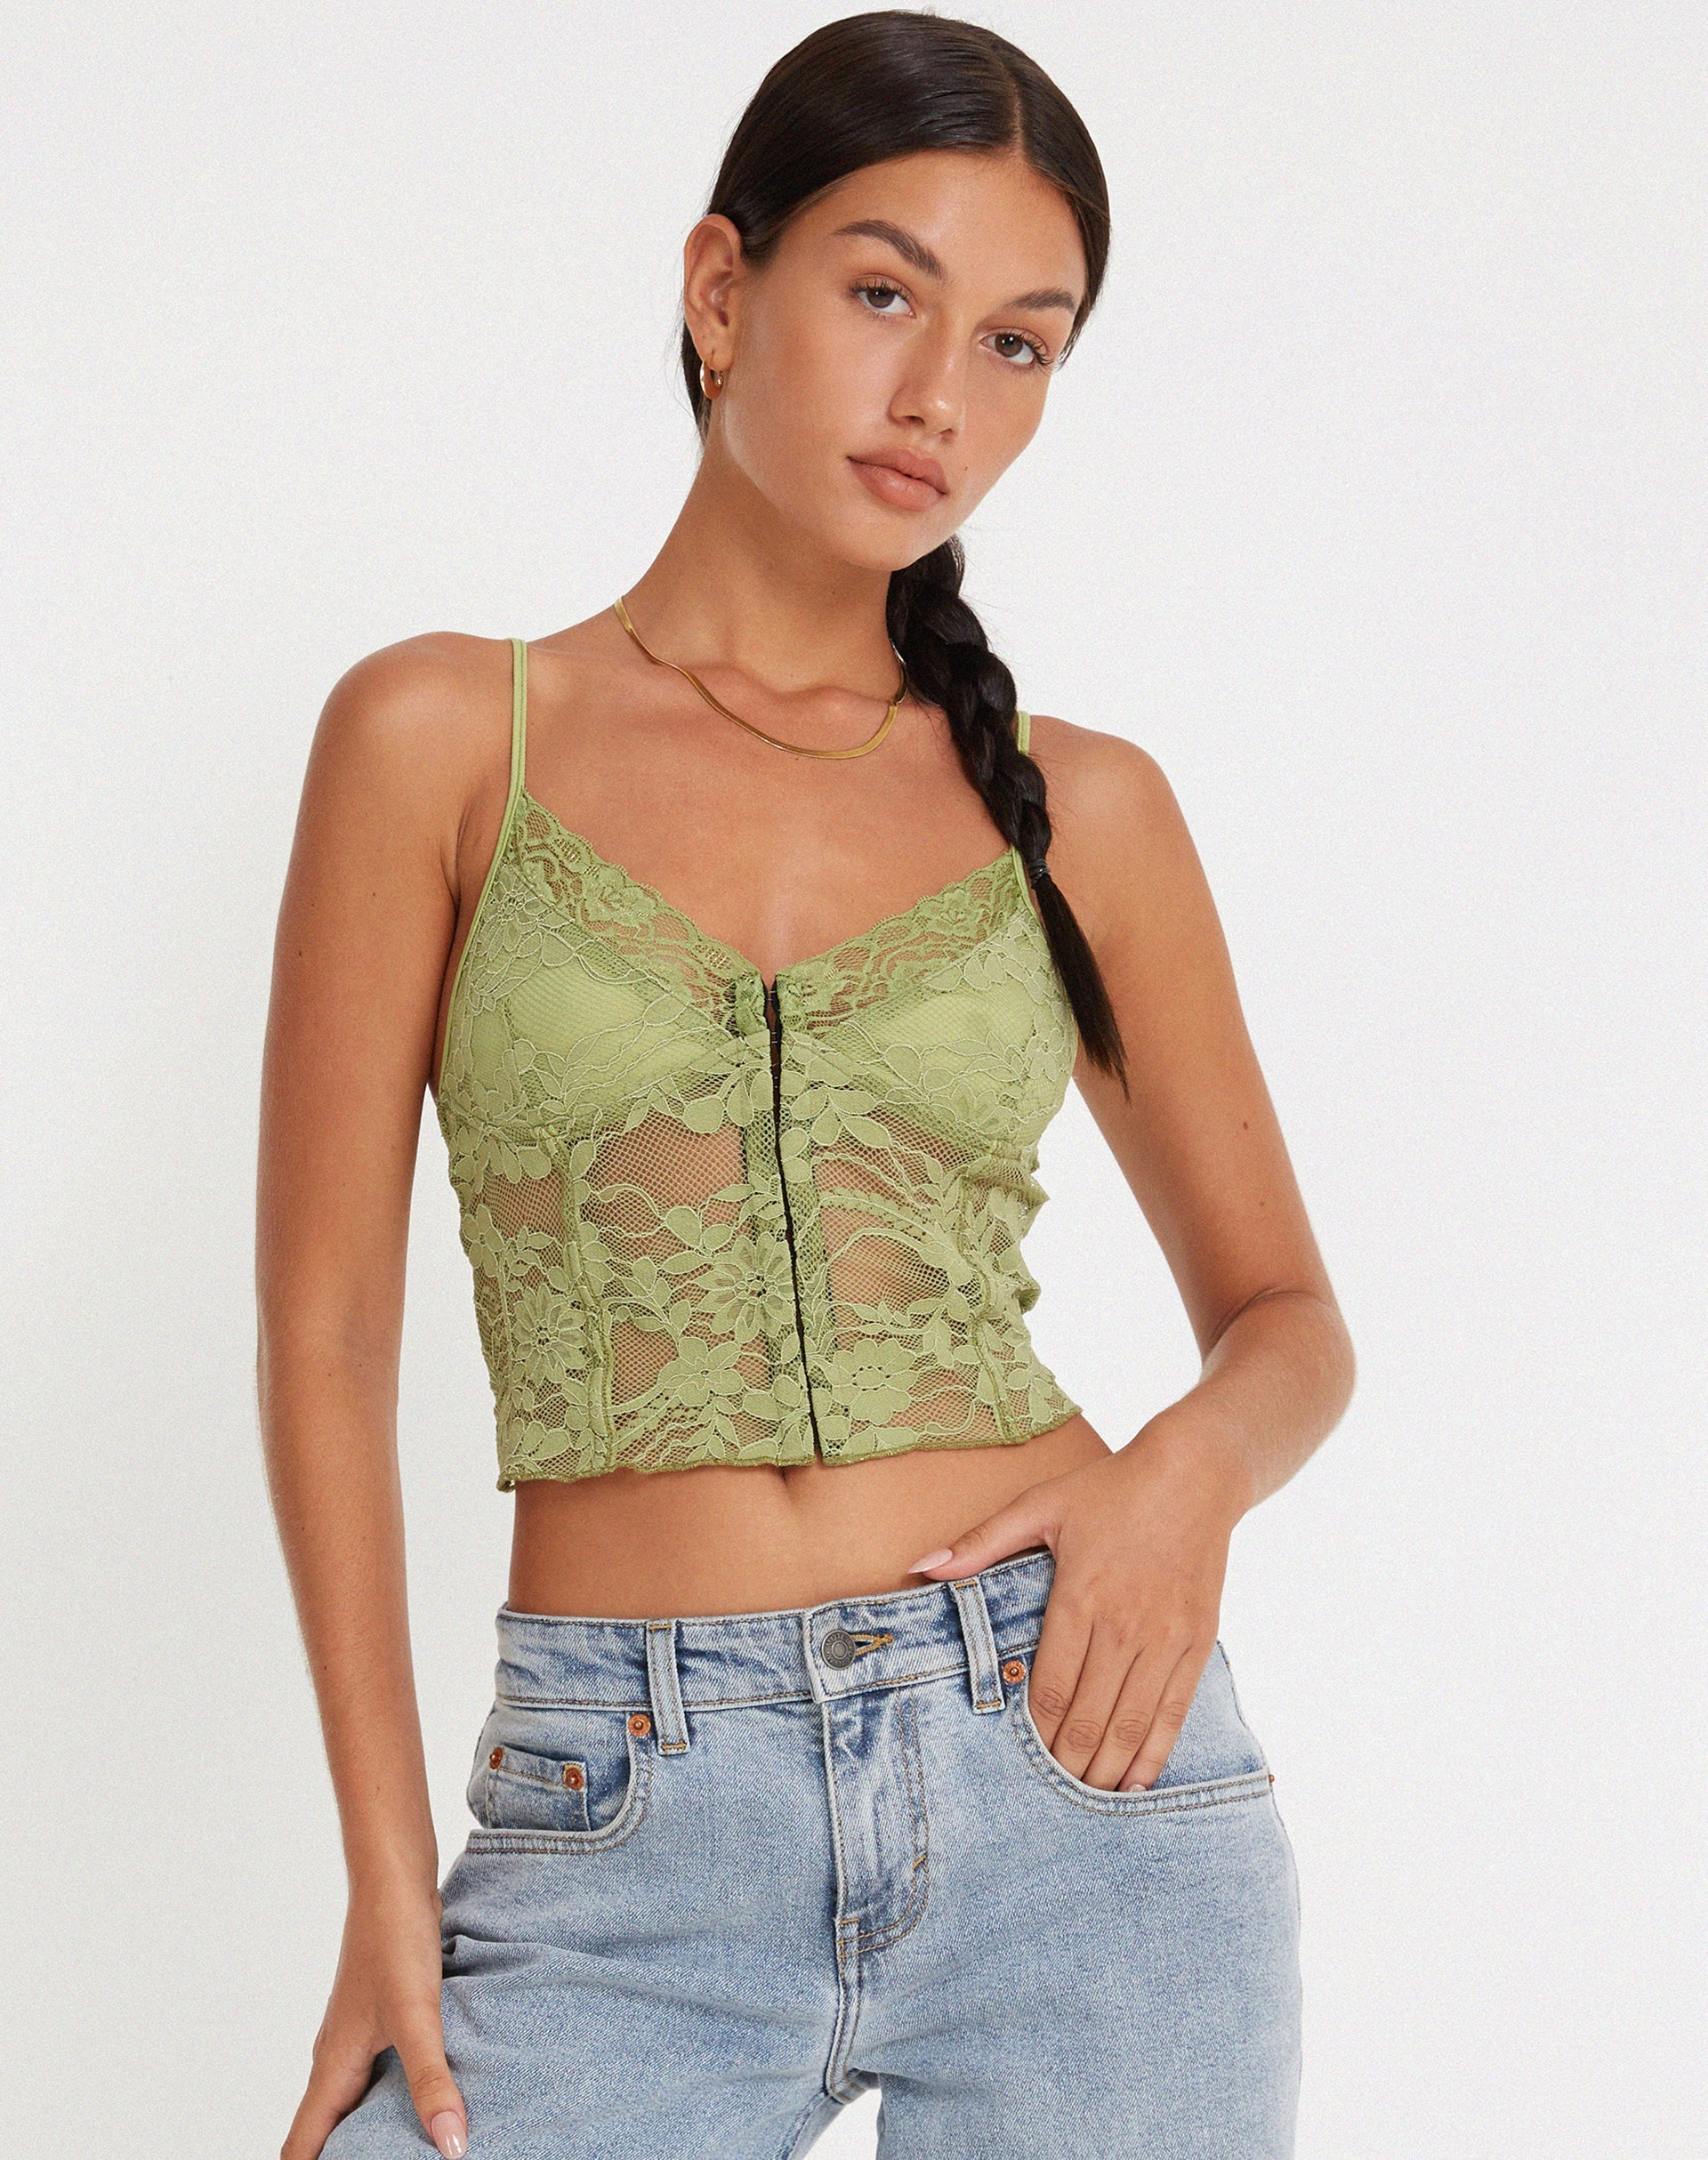 image of Yenko Crop Top in Lace Green